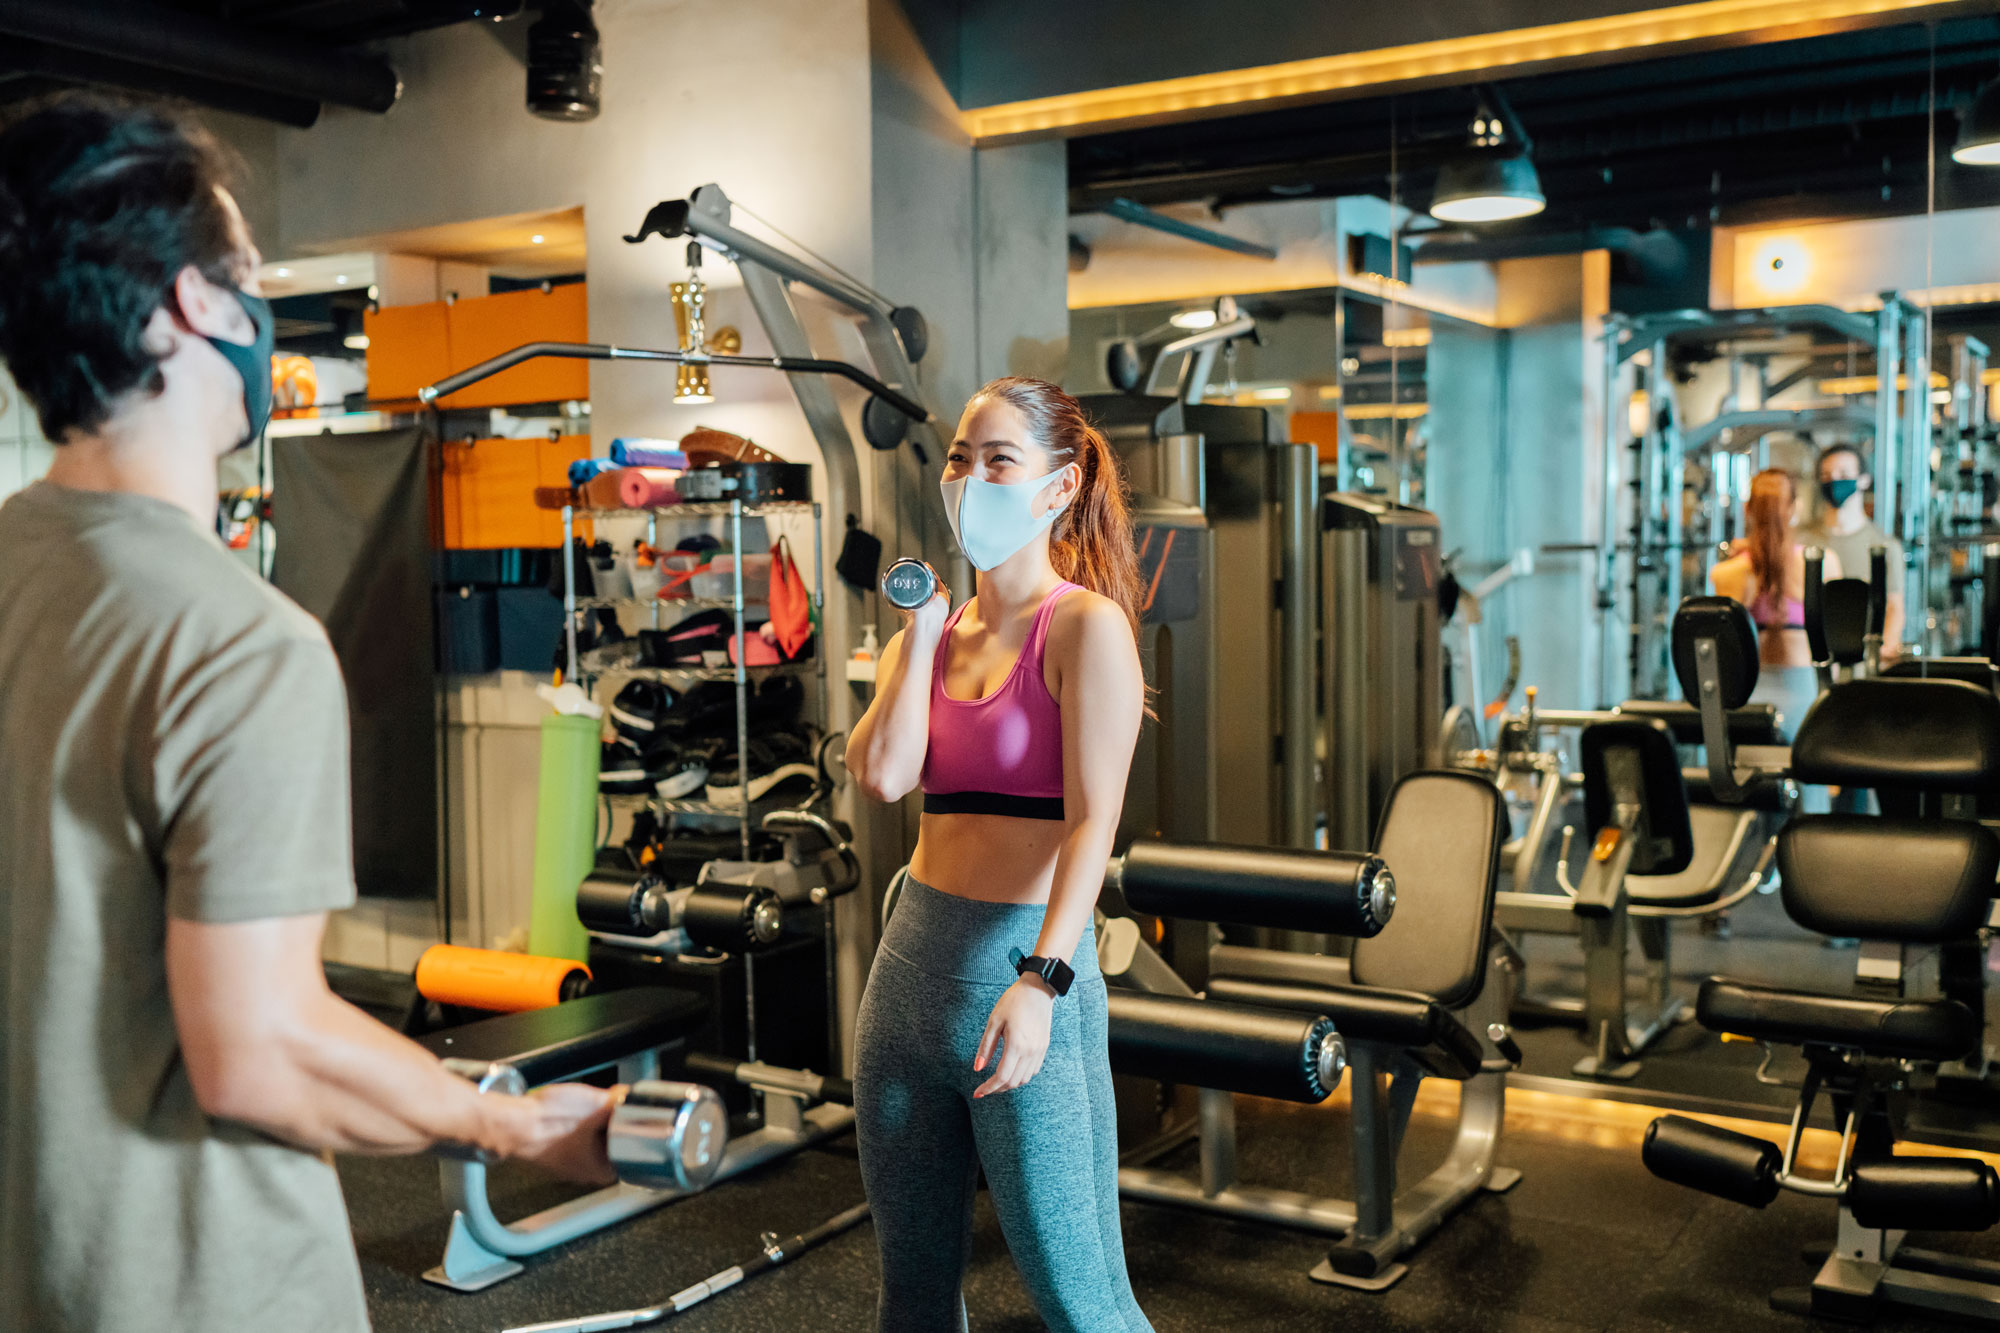 Man and woman working out in the gym wearing masks